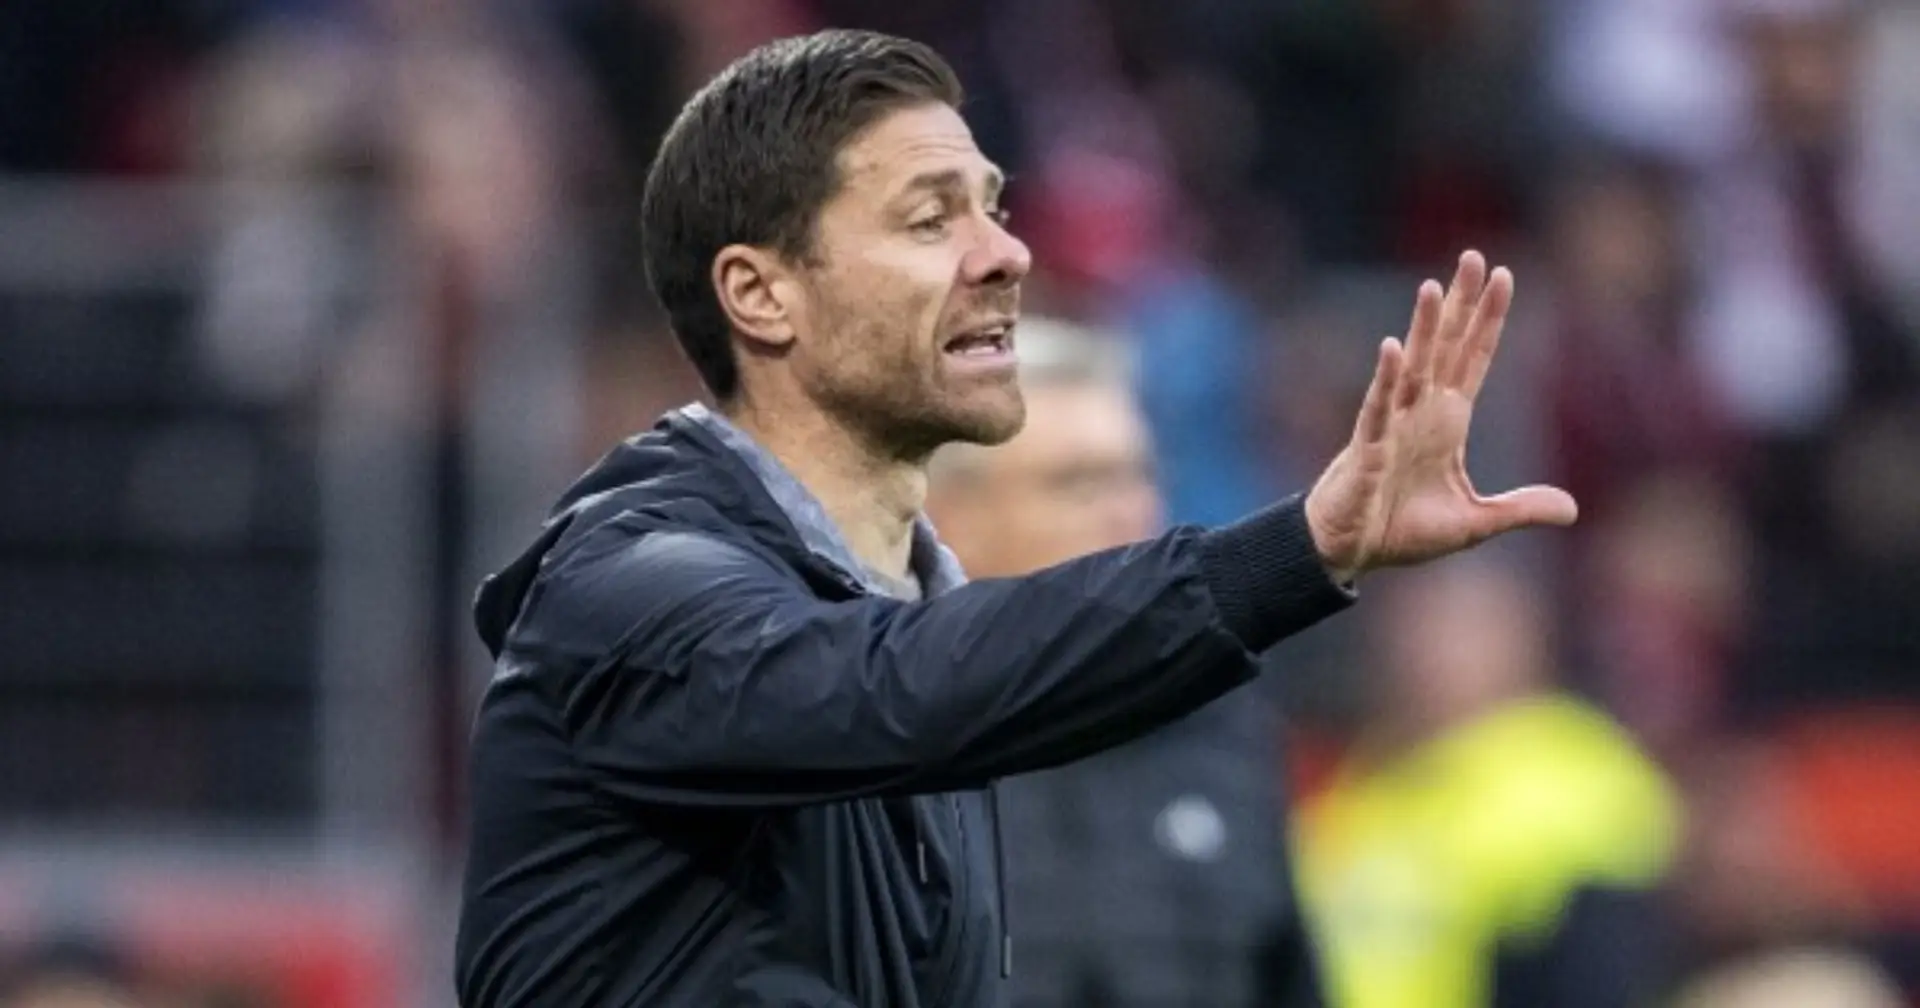 'He's coming home one day': Liverpool fans react to Xabi Alonso's meteoric managerial rise